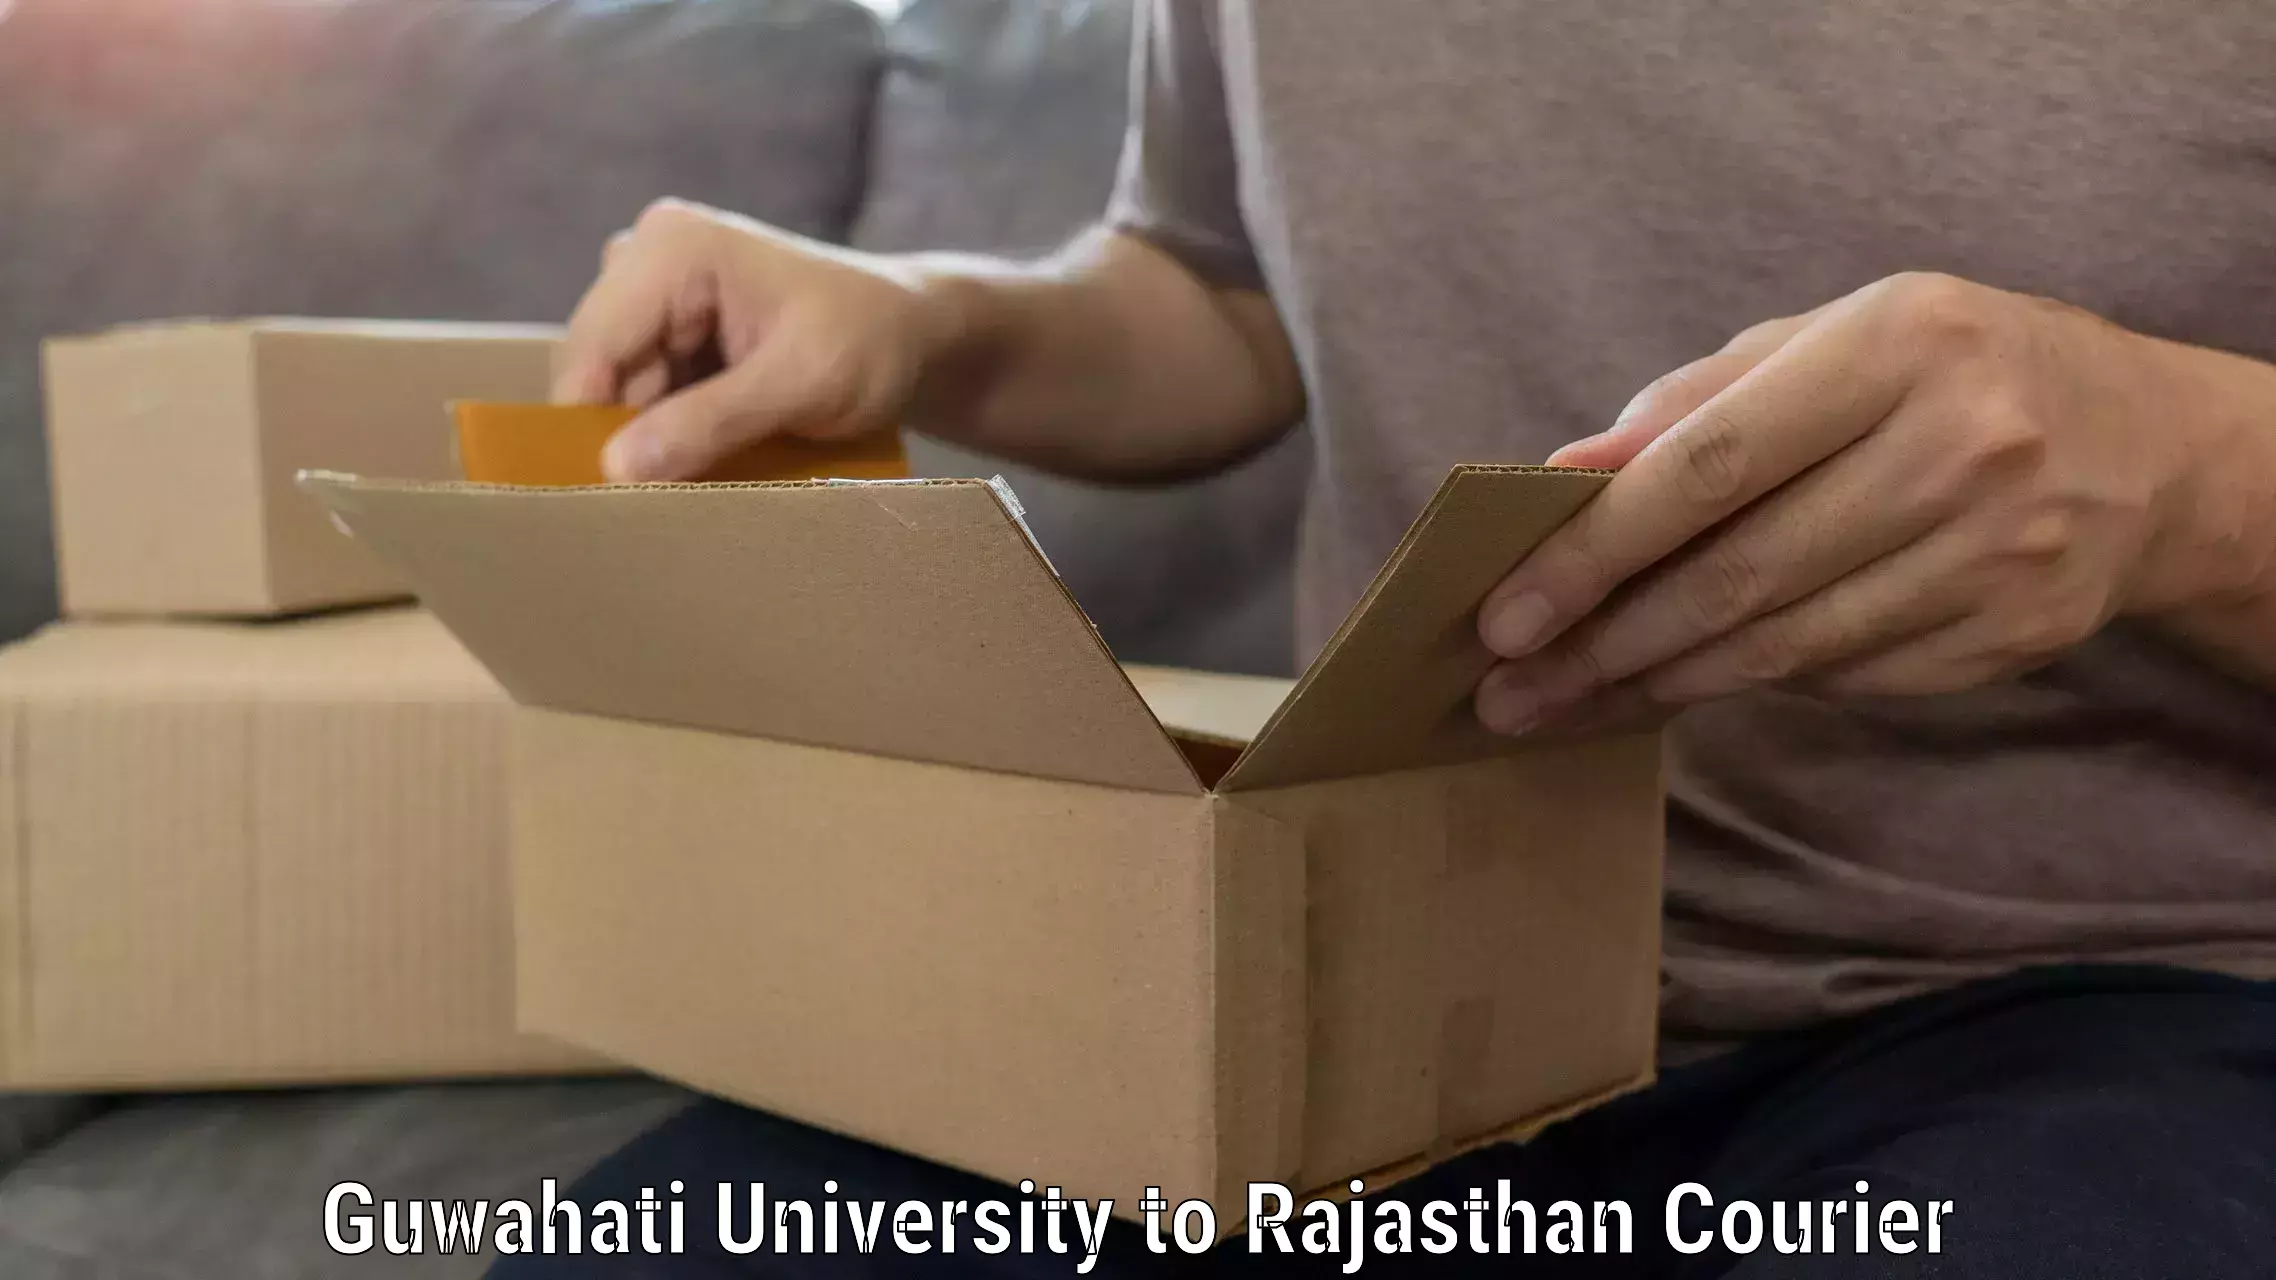 Trusted relocation services Guwahati University to Makrana